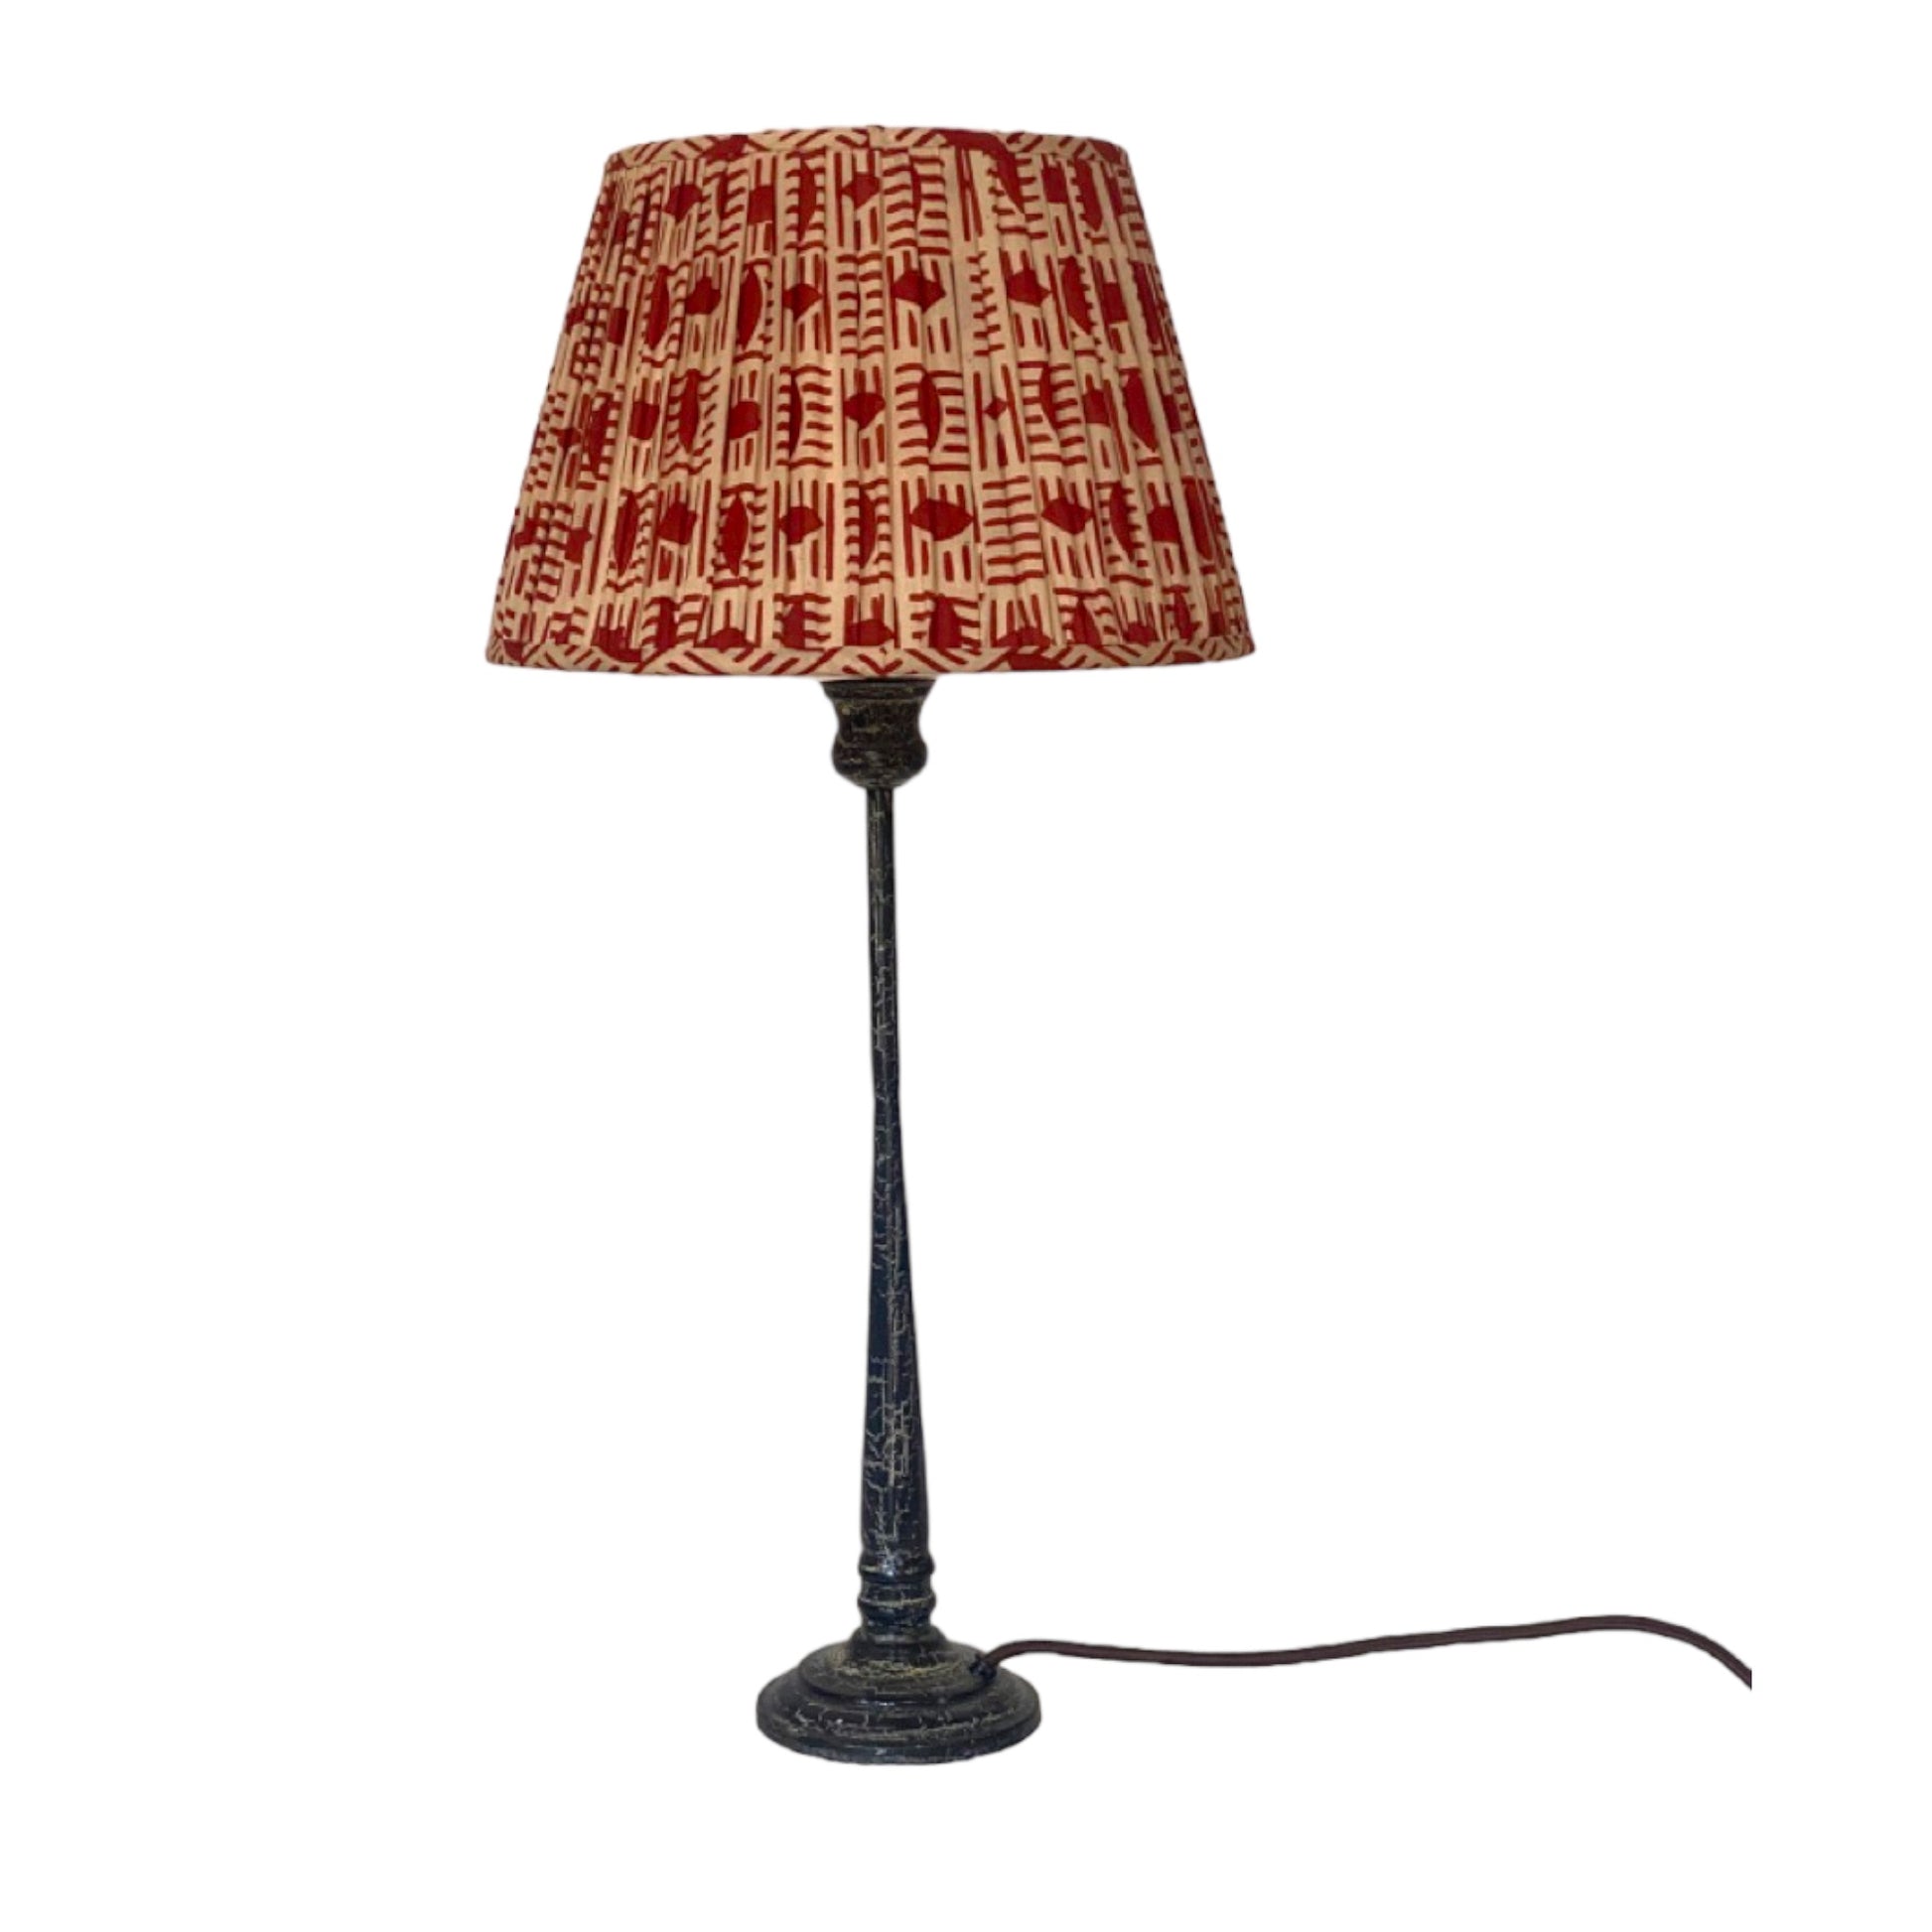 Red brick cotton lampshade on candlestick lamp base